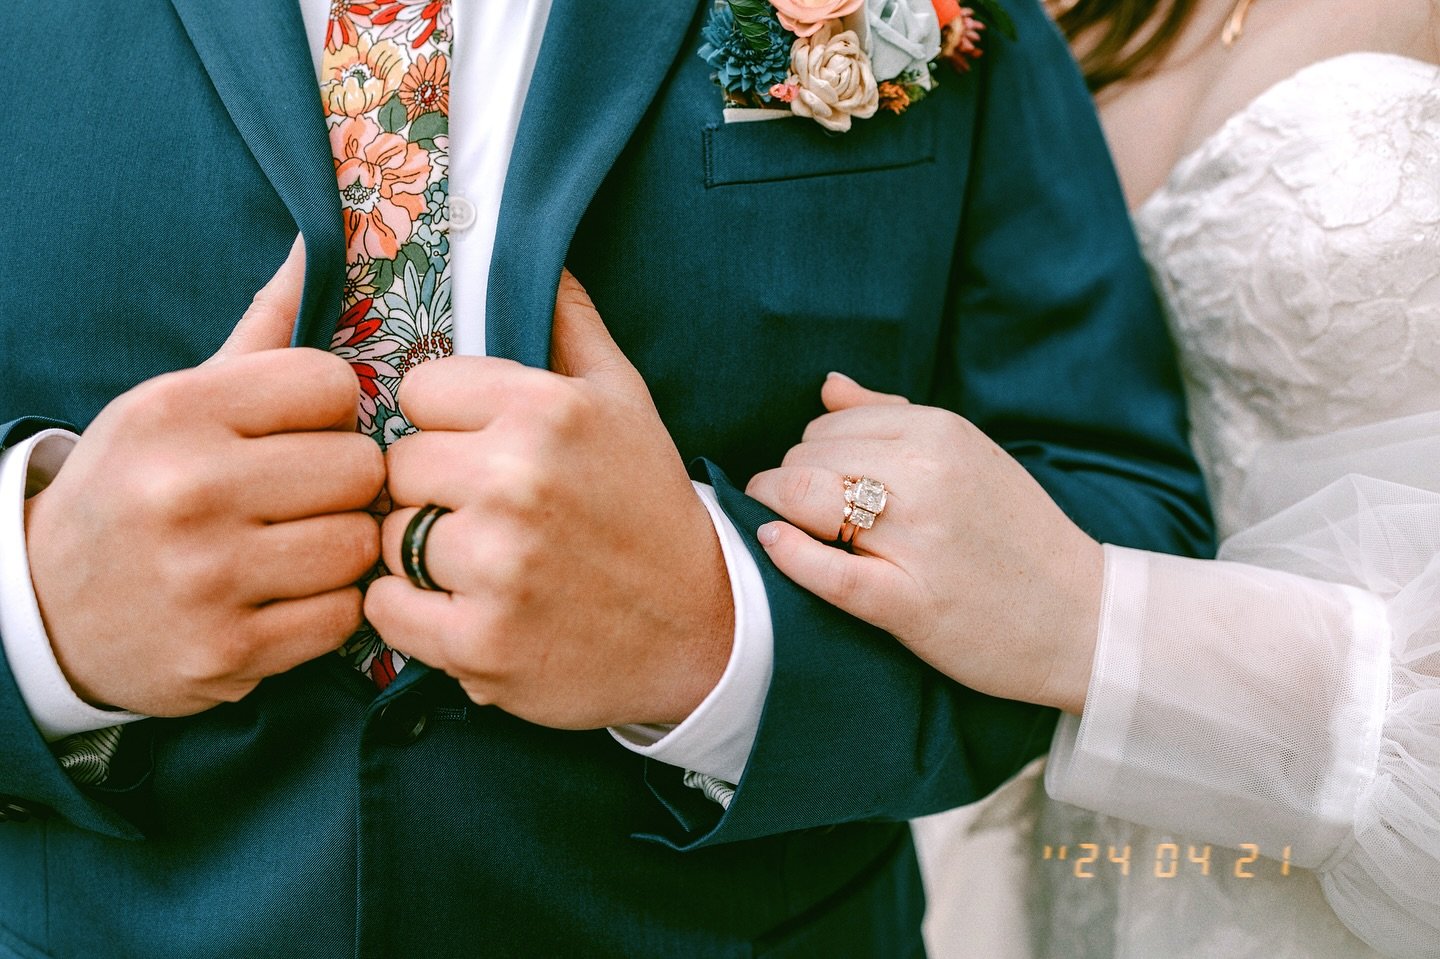 Fun fact: the tradition of the wedding ring dates back to ancient Egypt, where circles were seen as symbols of eternity. Fast forward to today, and wedding bands still symbolize everlasting love and commitment. 💍❤️